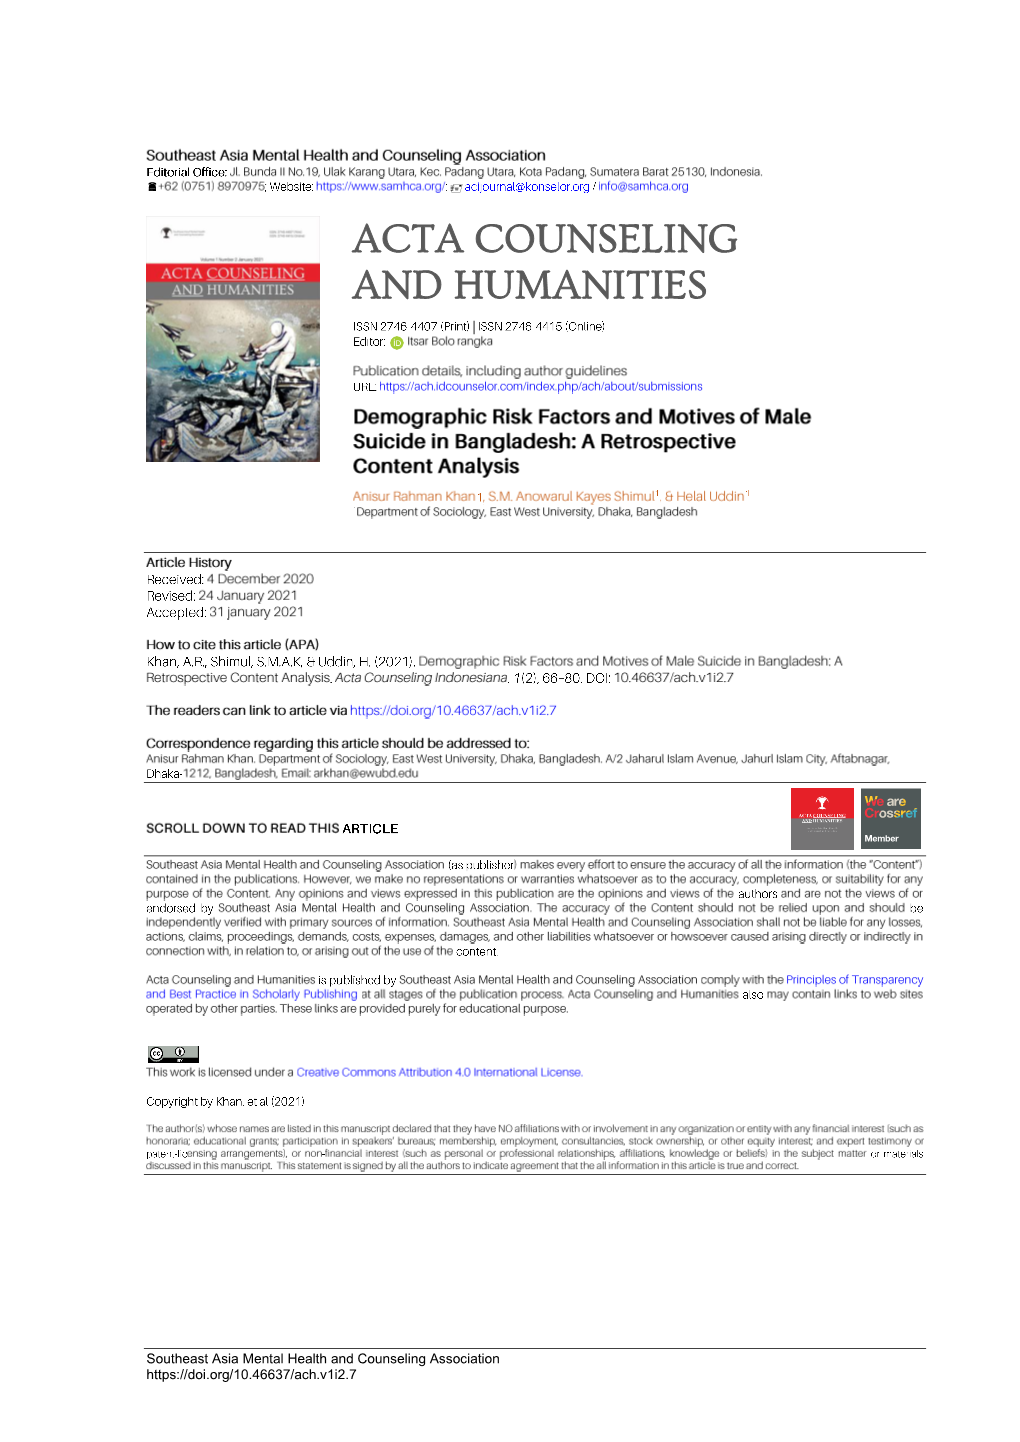 Acta Counseling and Humanities